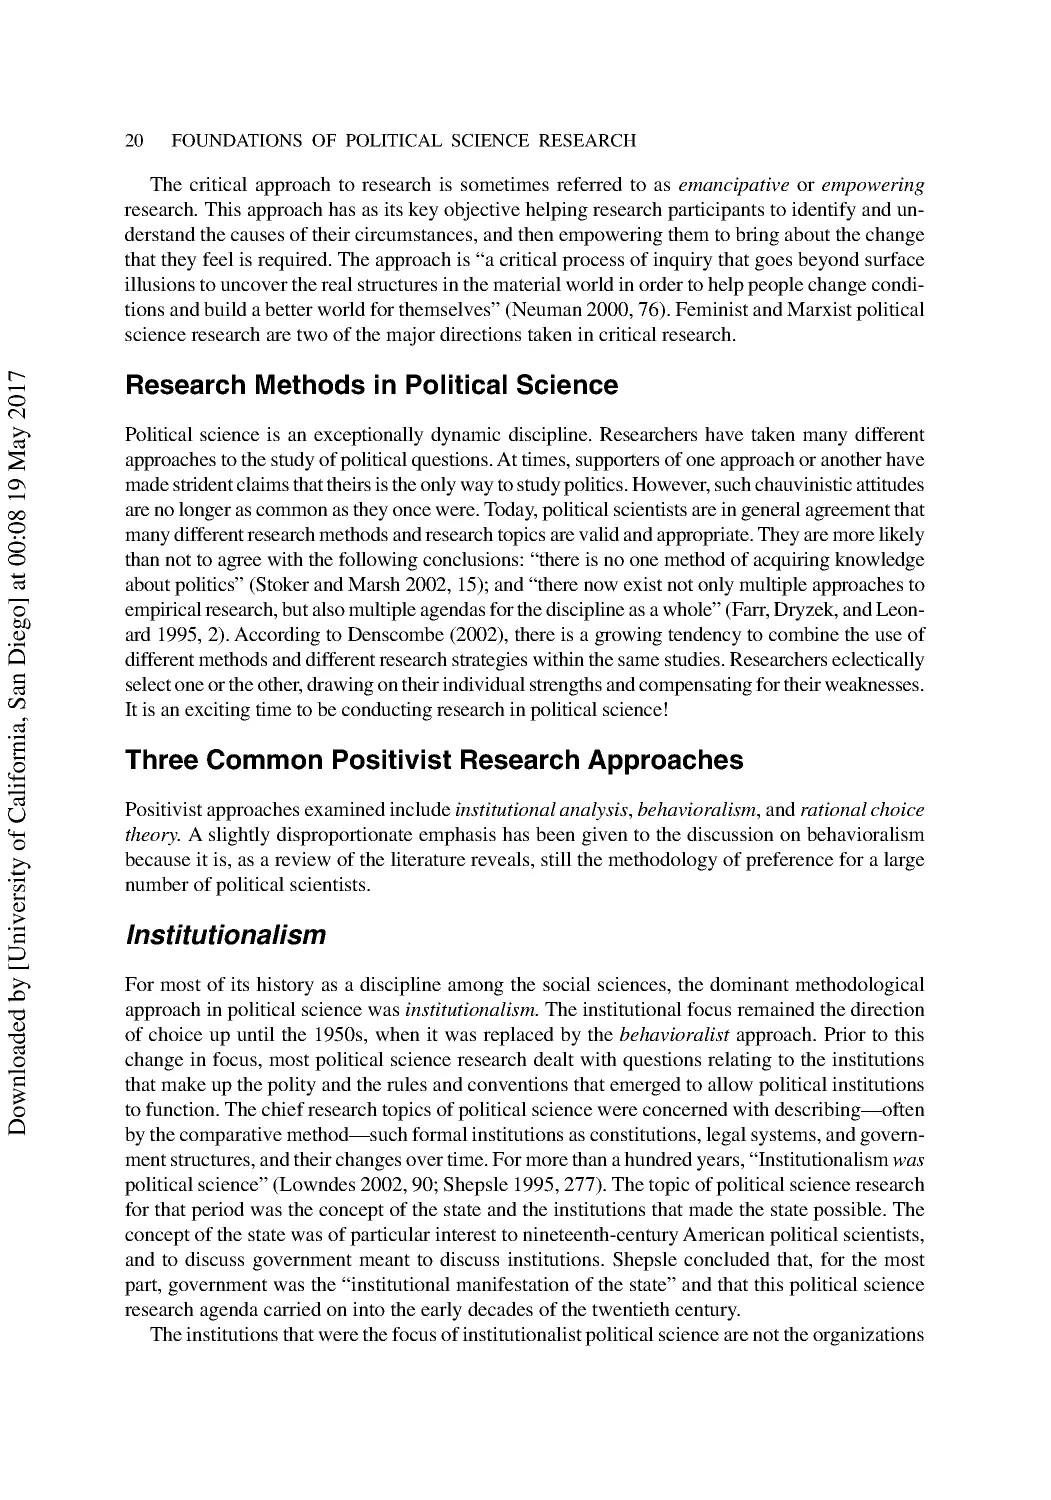 Research Methods in Political Science
Three Common Positivist Research Approaches